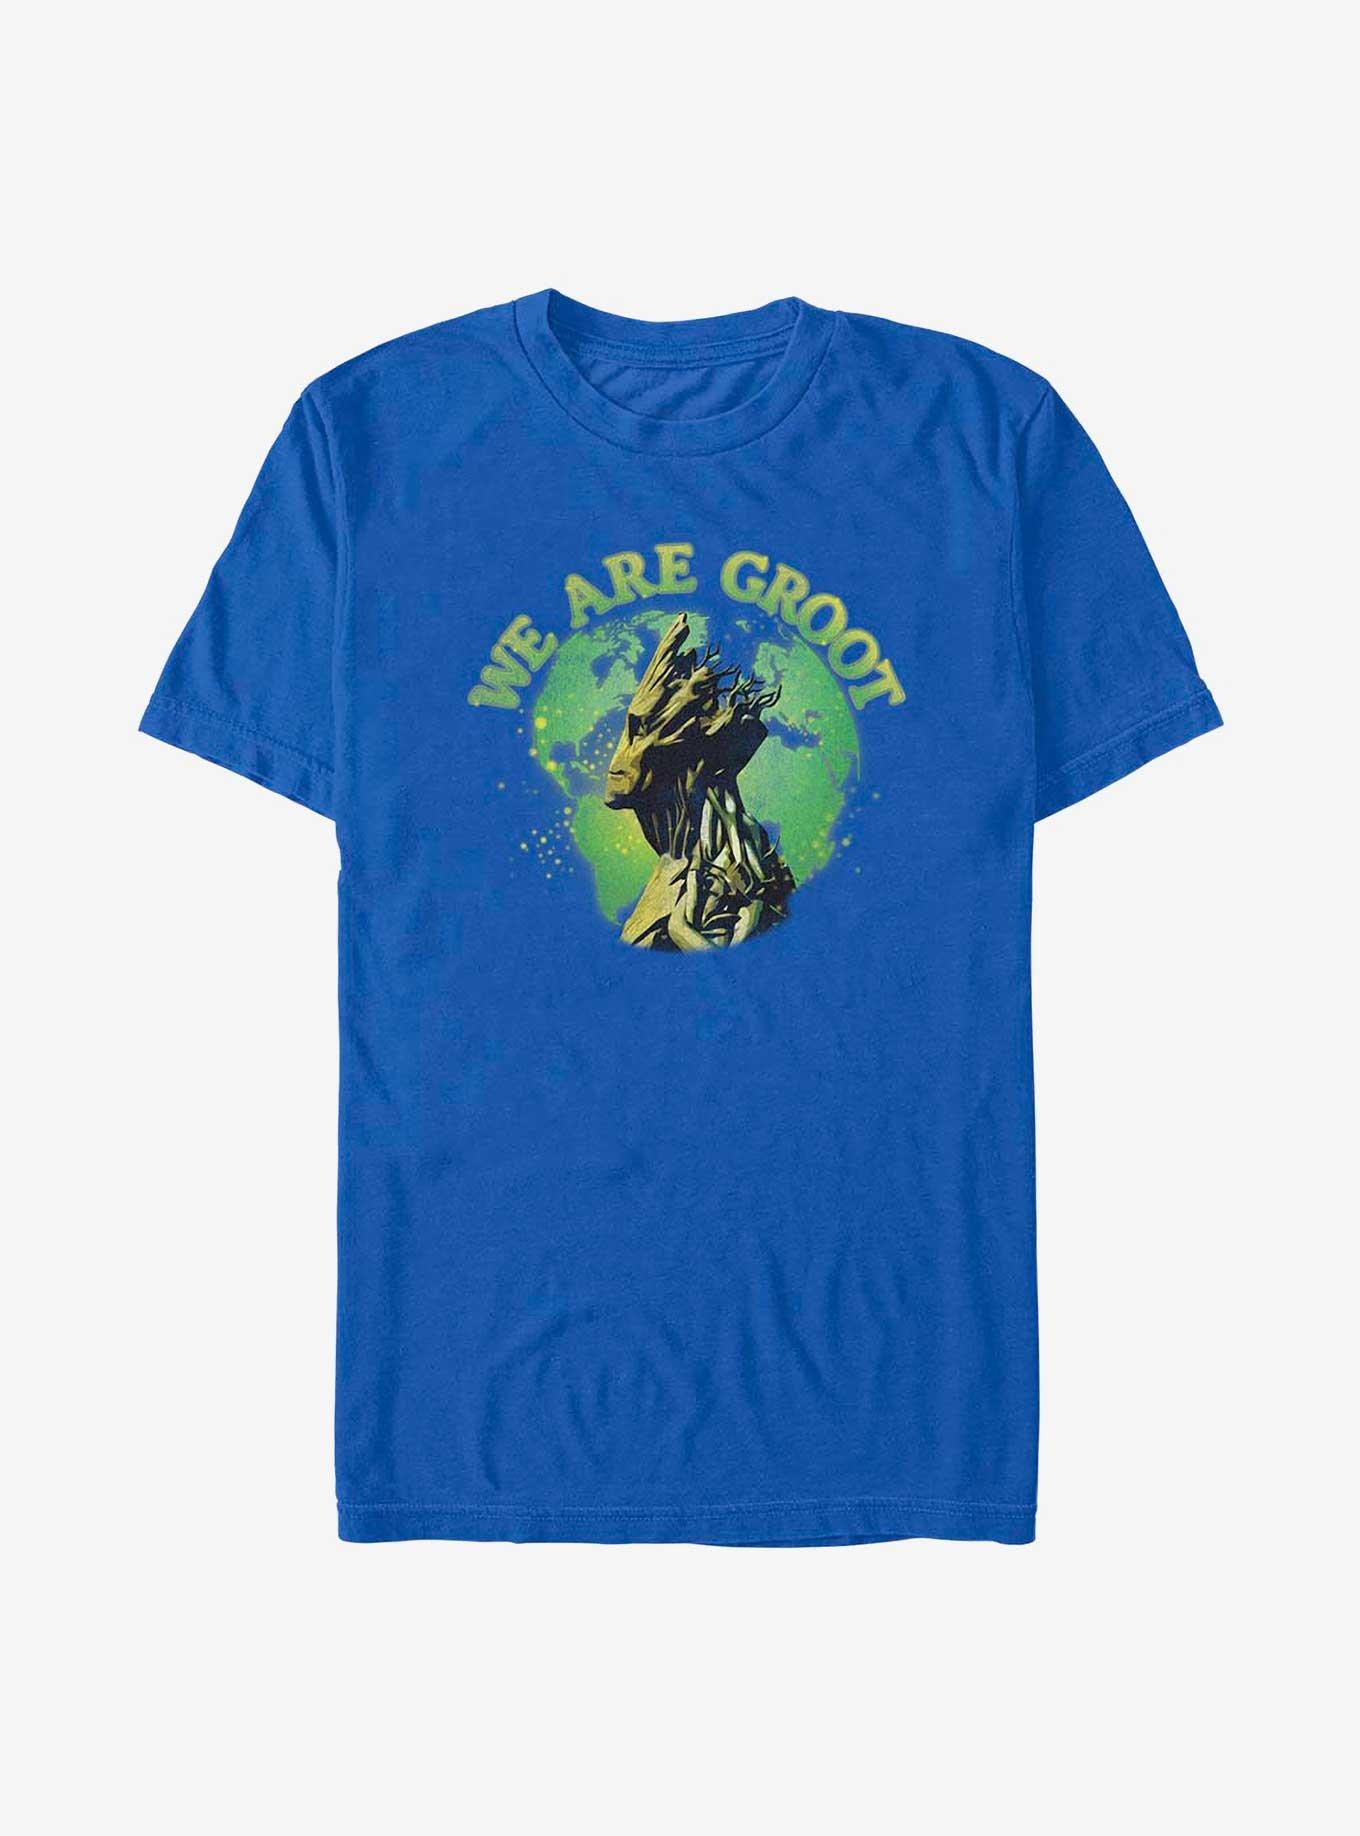 Marvel Guardians of the Galaxy Earth Day We Are Groot T-Shirt, ROYAL, hi-res